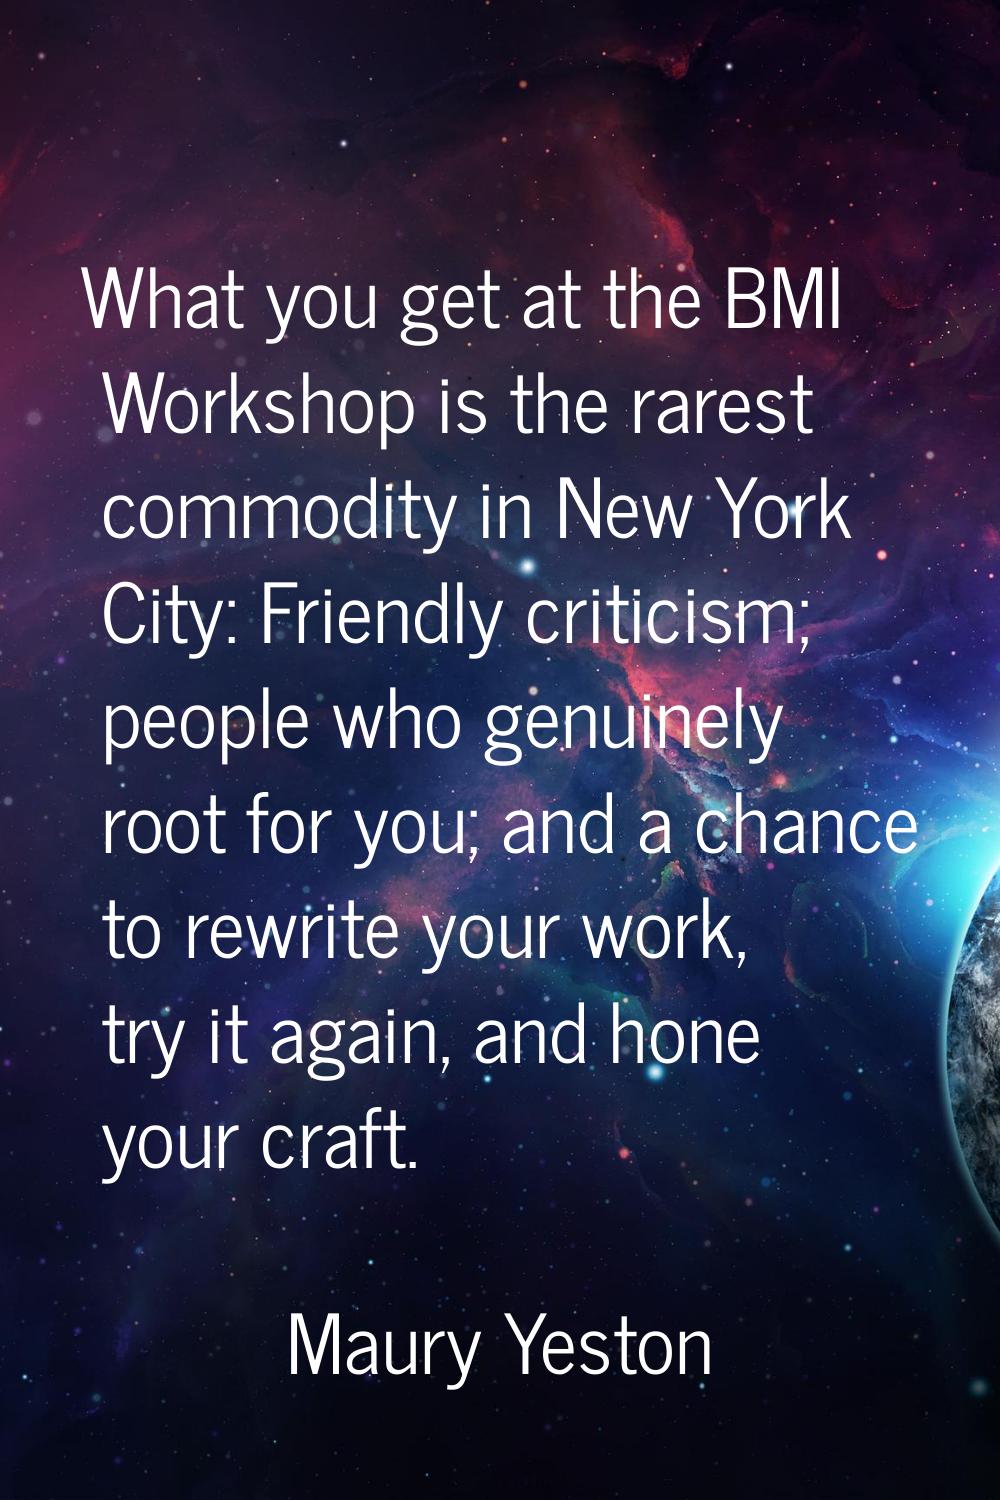 What you get at the BMI Workshop is the rarest commodity in New York City: Friendly criticism; peop